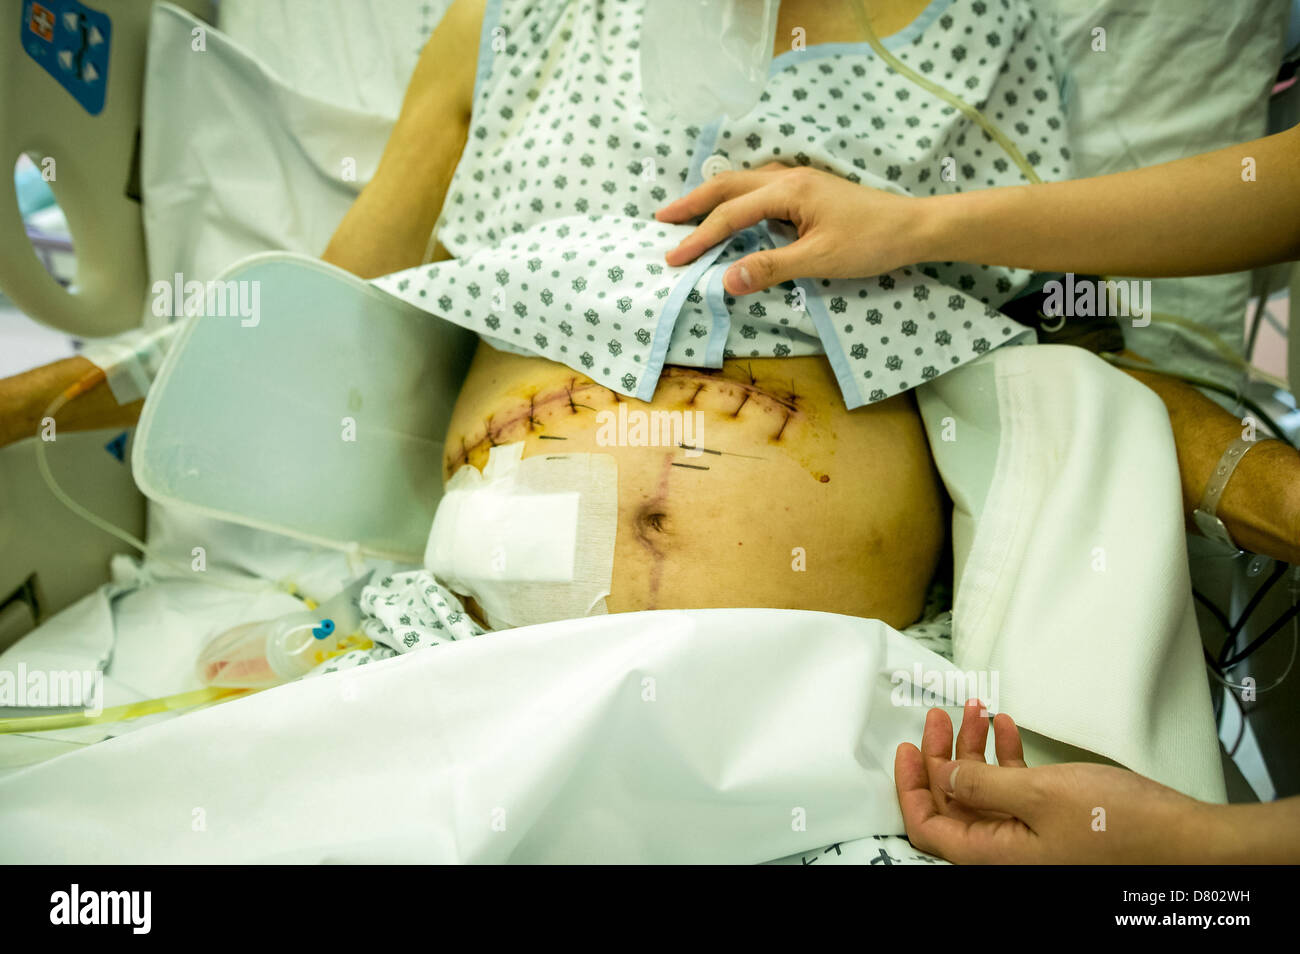 Medical staff attend to a patient who has had stitches in the abdominal area following surgery, on an intensive care unit. Stock Photo